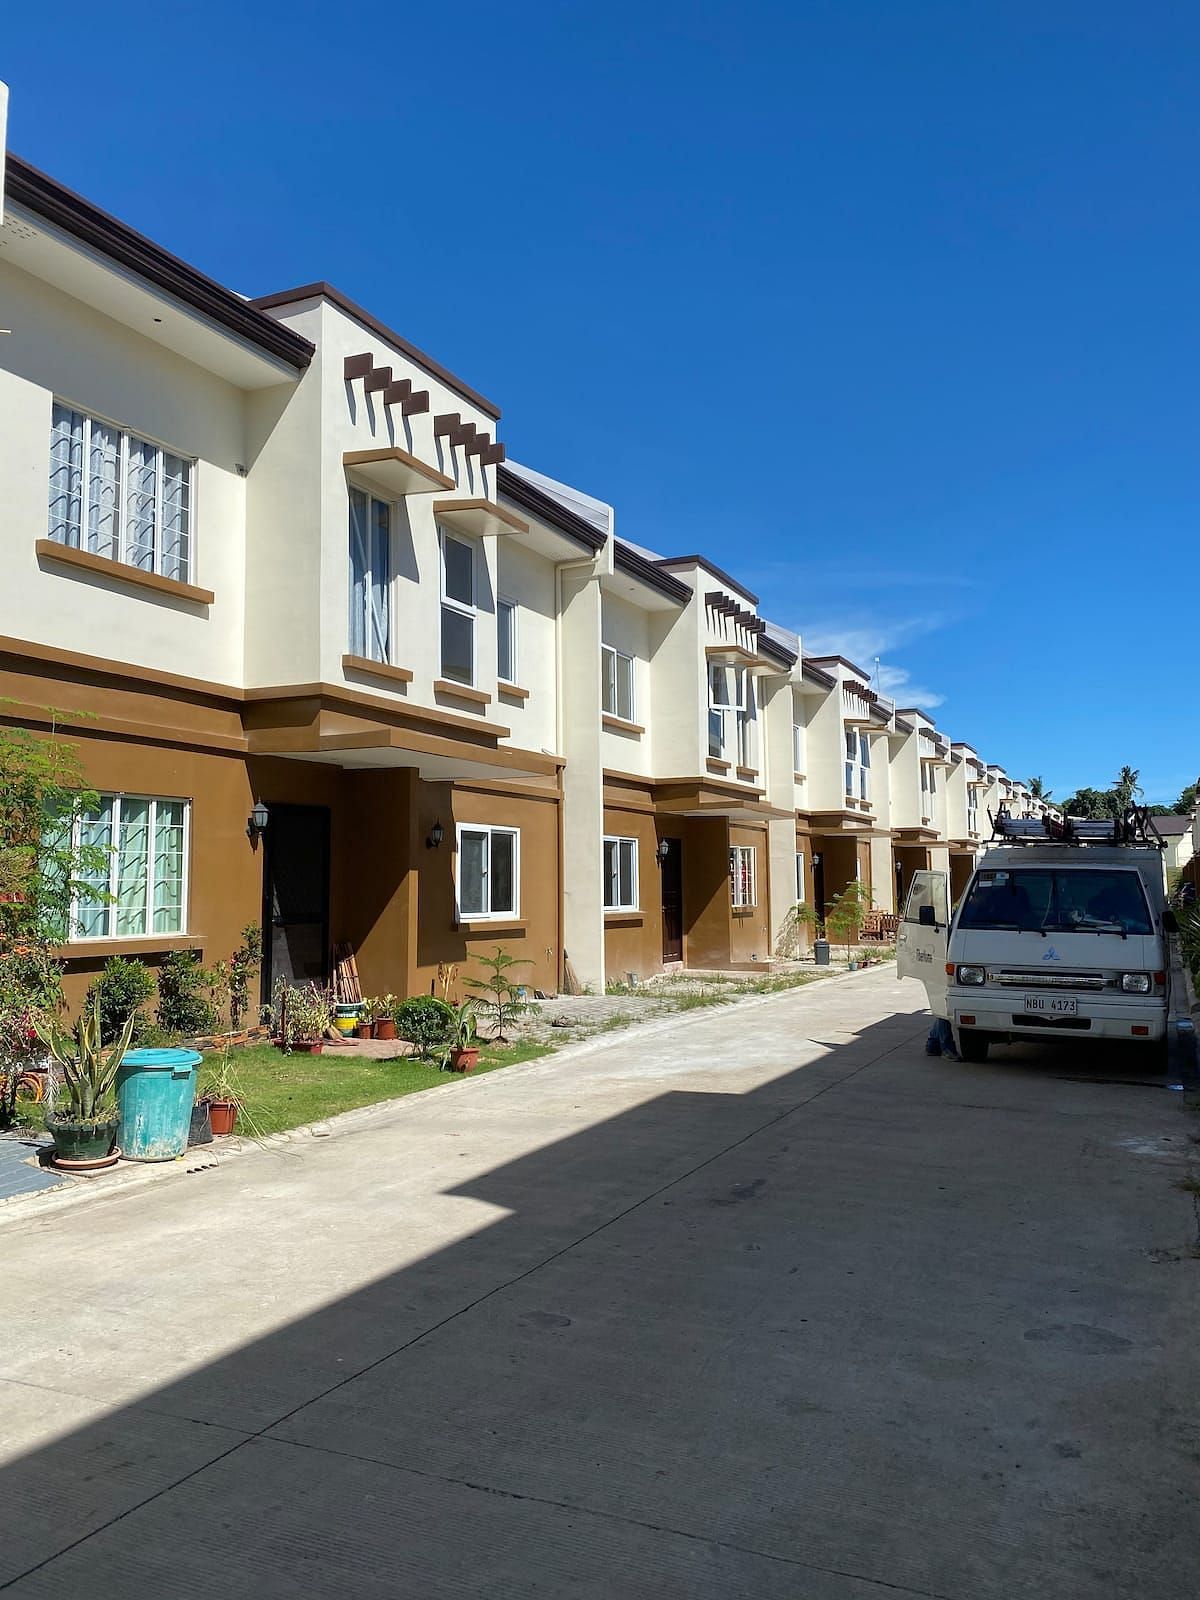 JWguest Townhouse at Talisay, Central Visayas | Townhouse in Bayswater Talisay | Jwbnb no brobnb 13